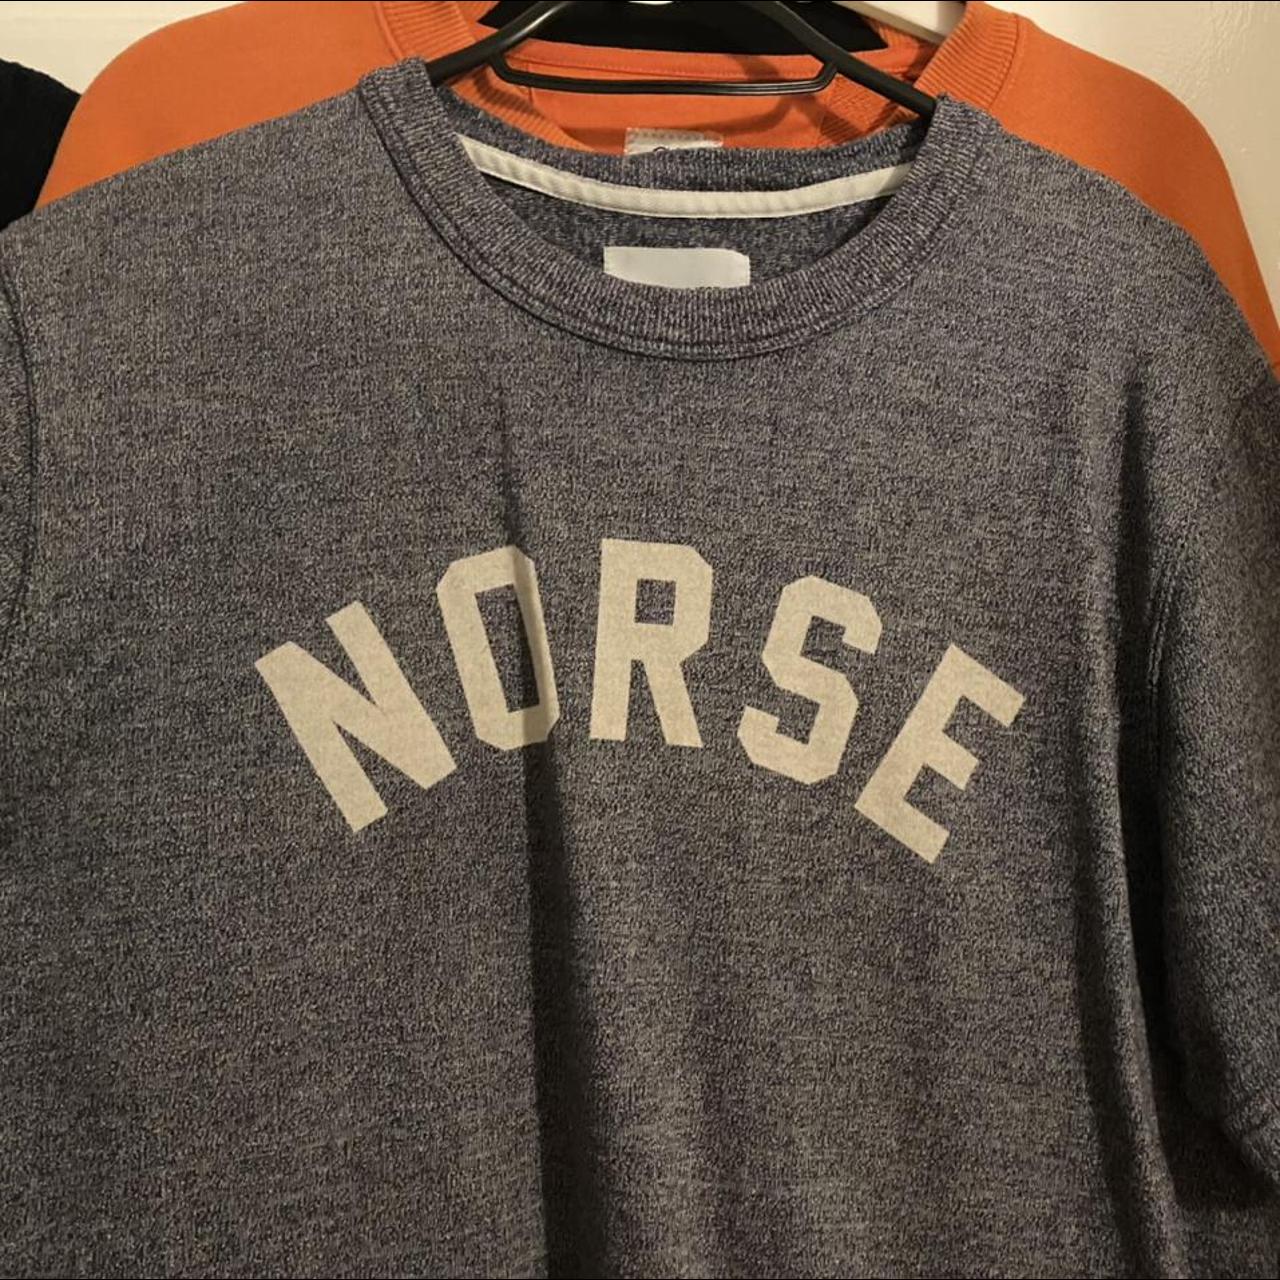 Product Image 2 - Norse Projects Tee
Size Medium
Condition Used